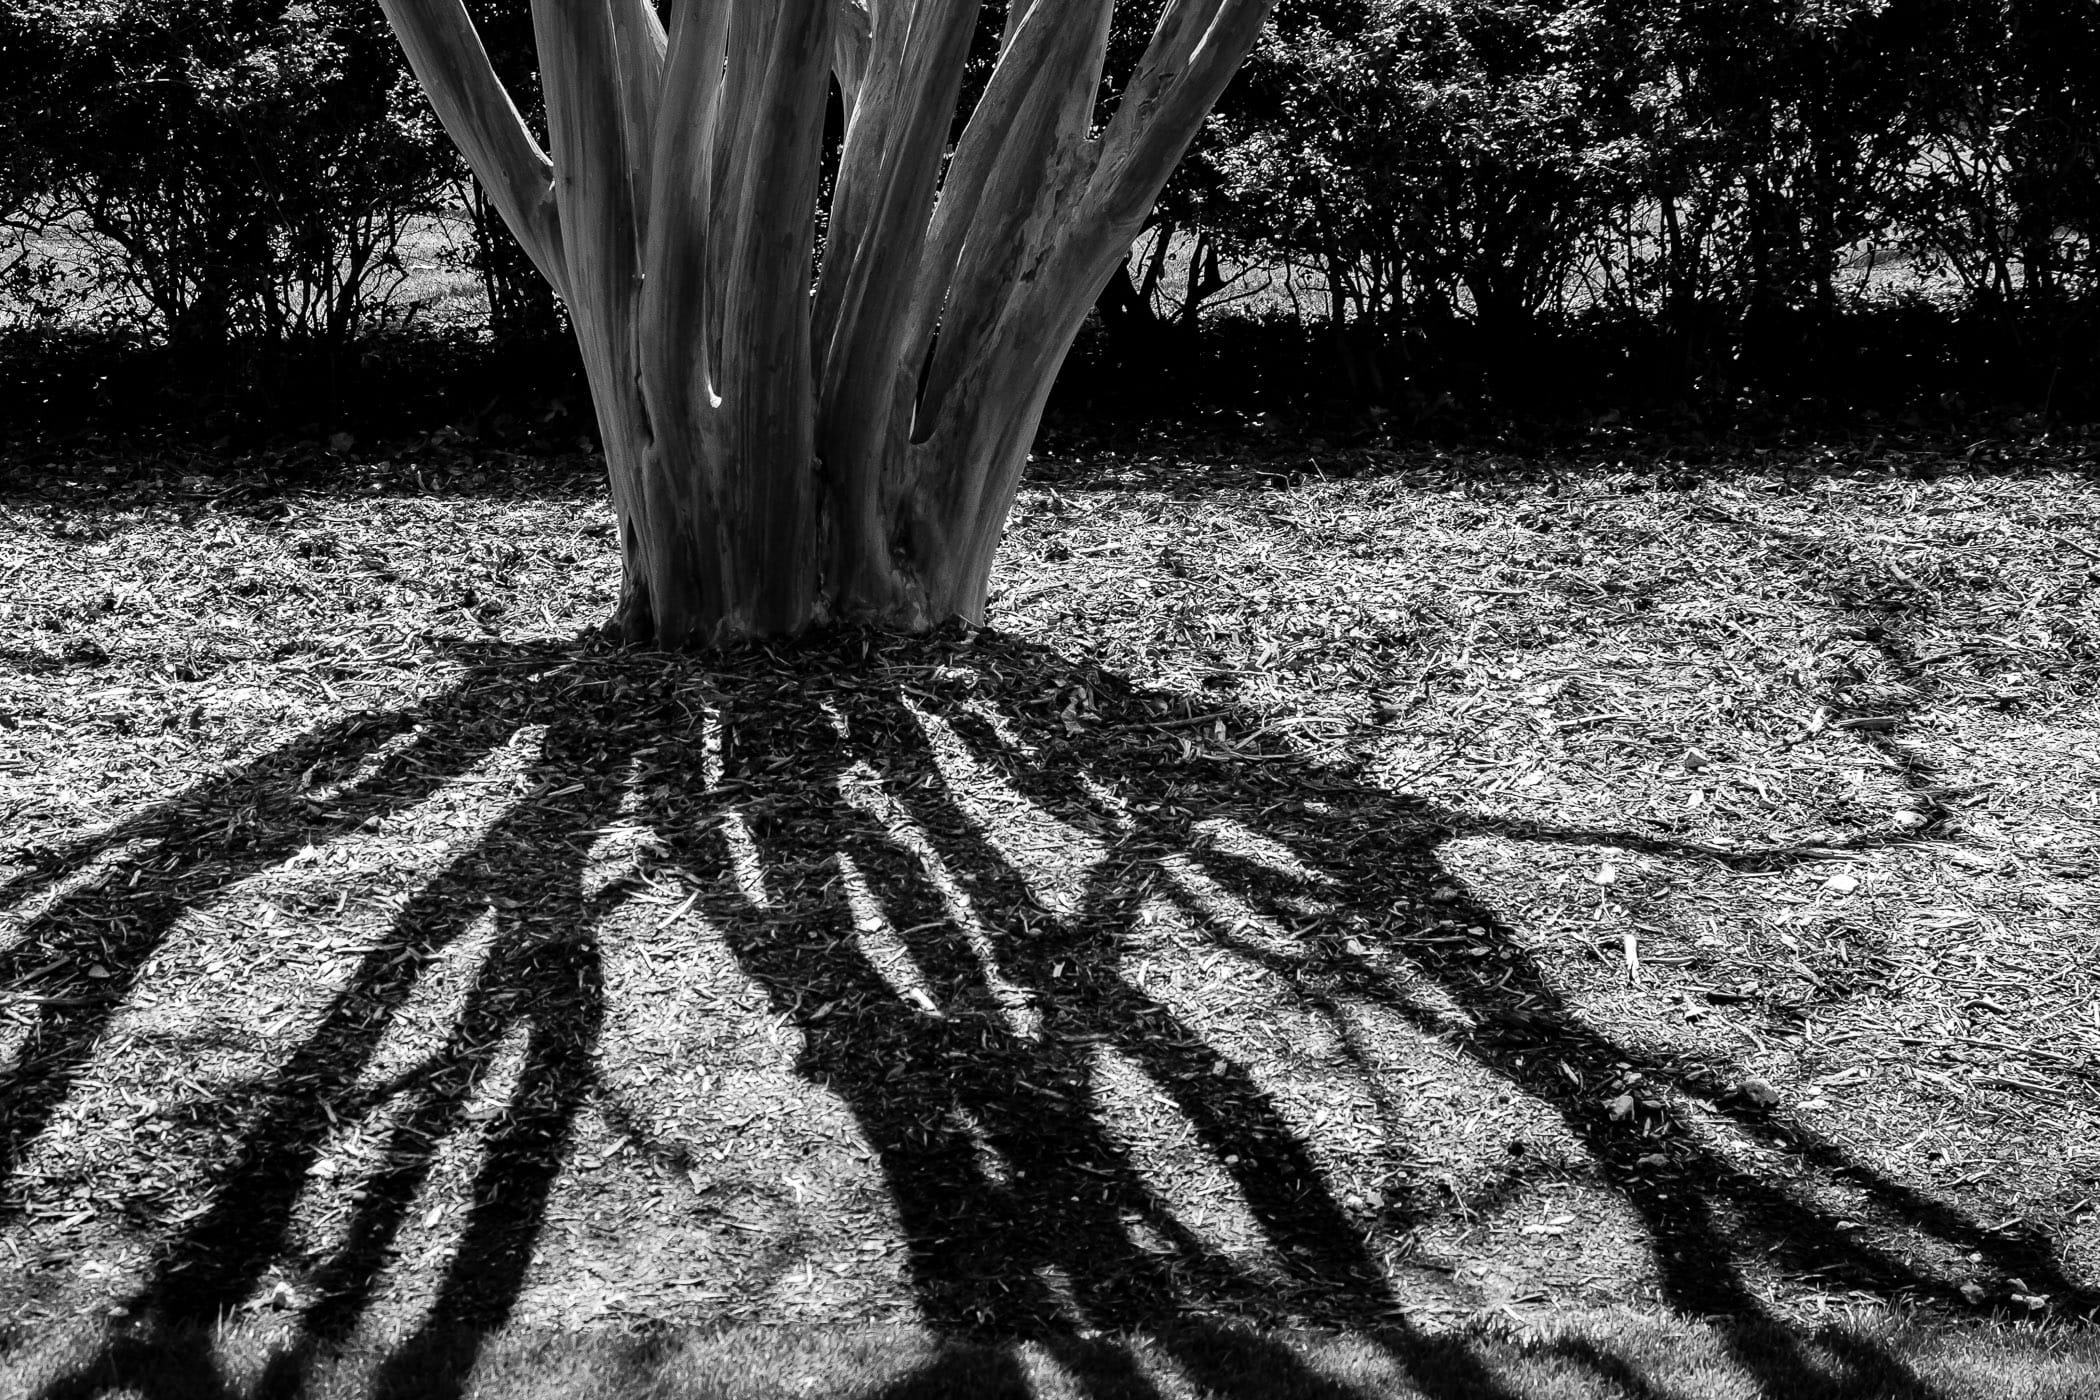 The shadows of a tree's branches resemble the tentacles of an octopus or a horror imagined by H.P. Lovecraft at the Dallas Arboretum.